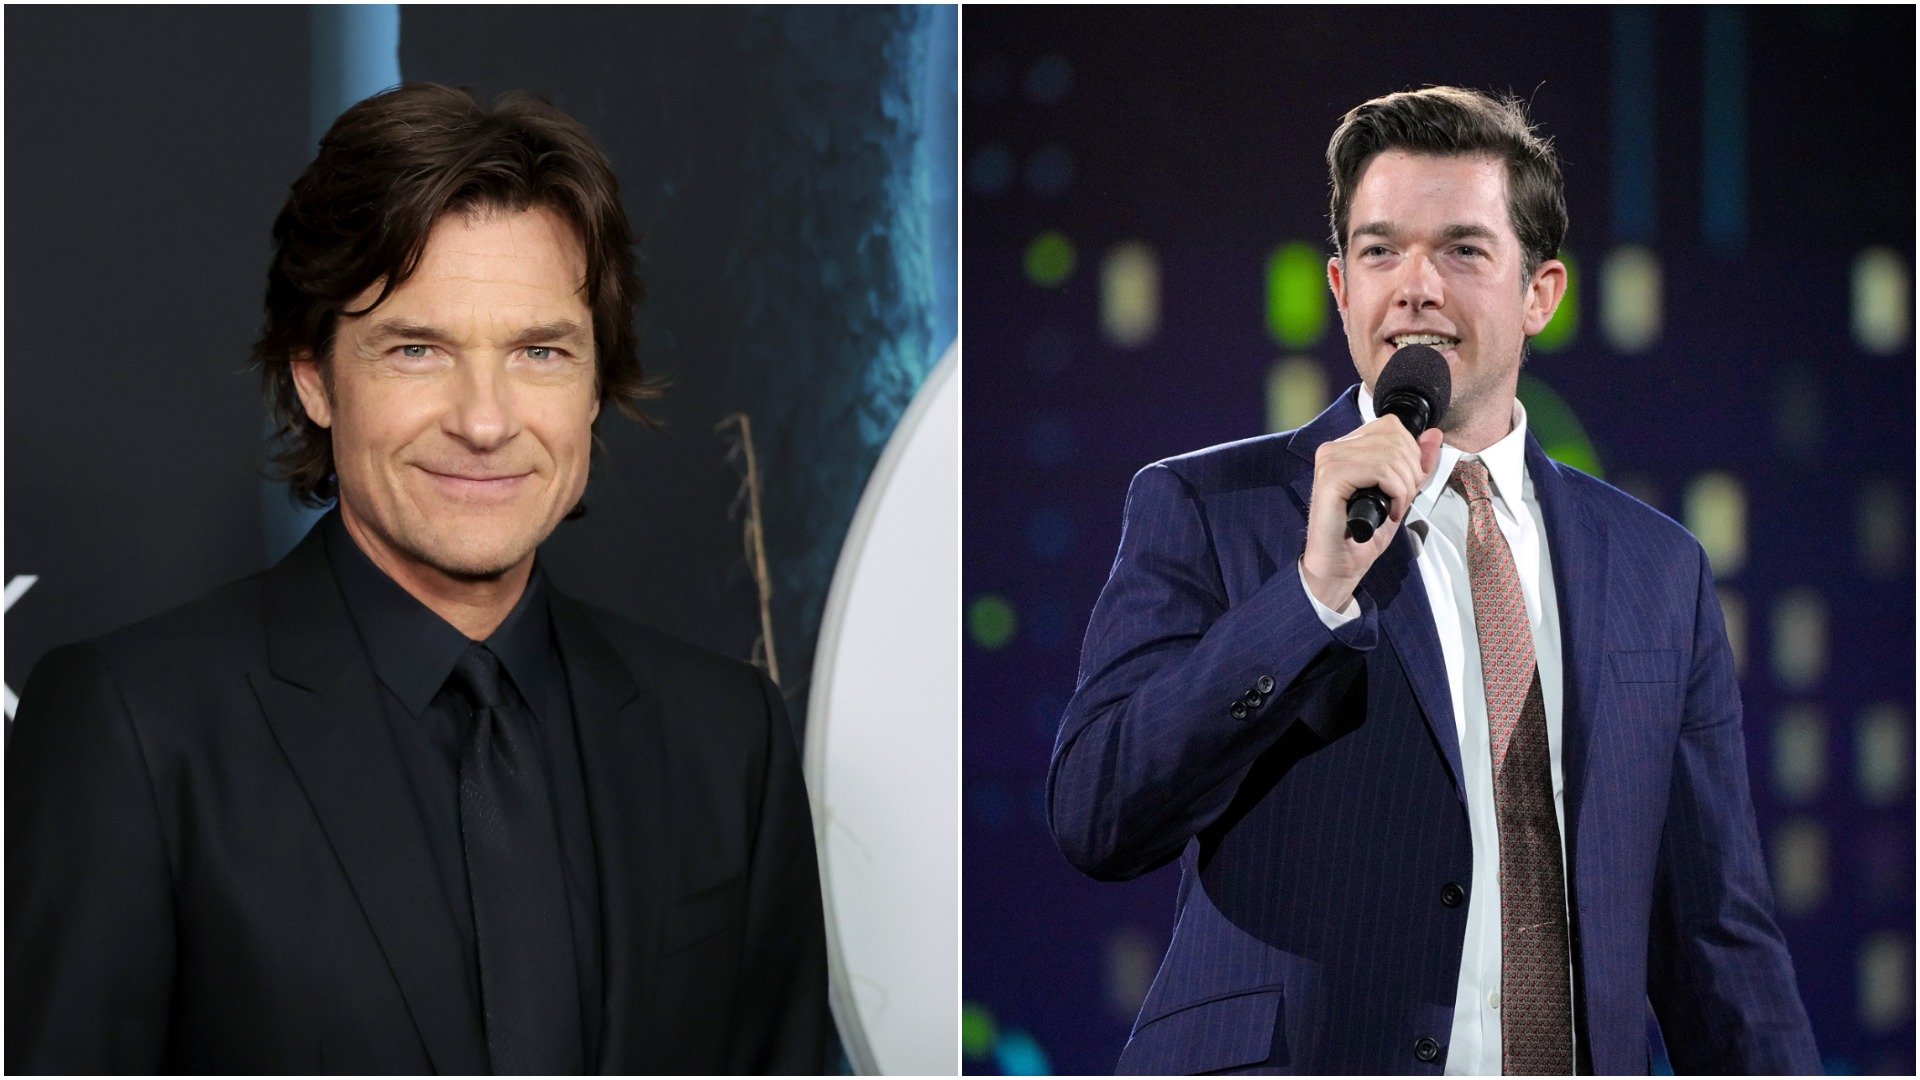 Jason Bateman smiles on the red carpet and John Mulaney performs on stage